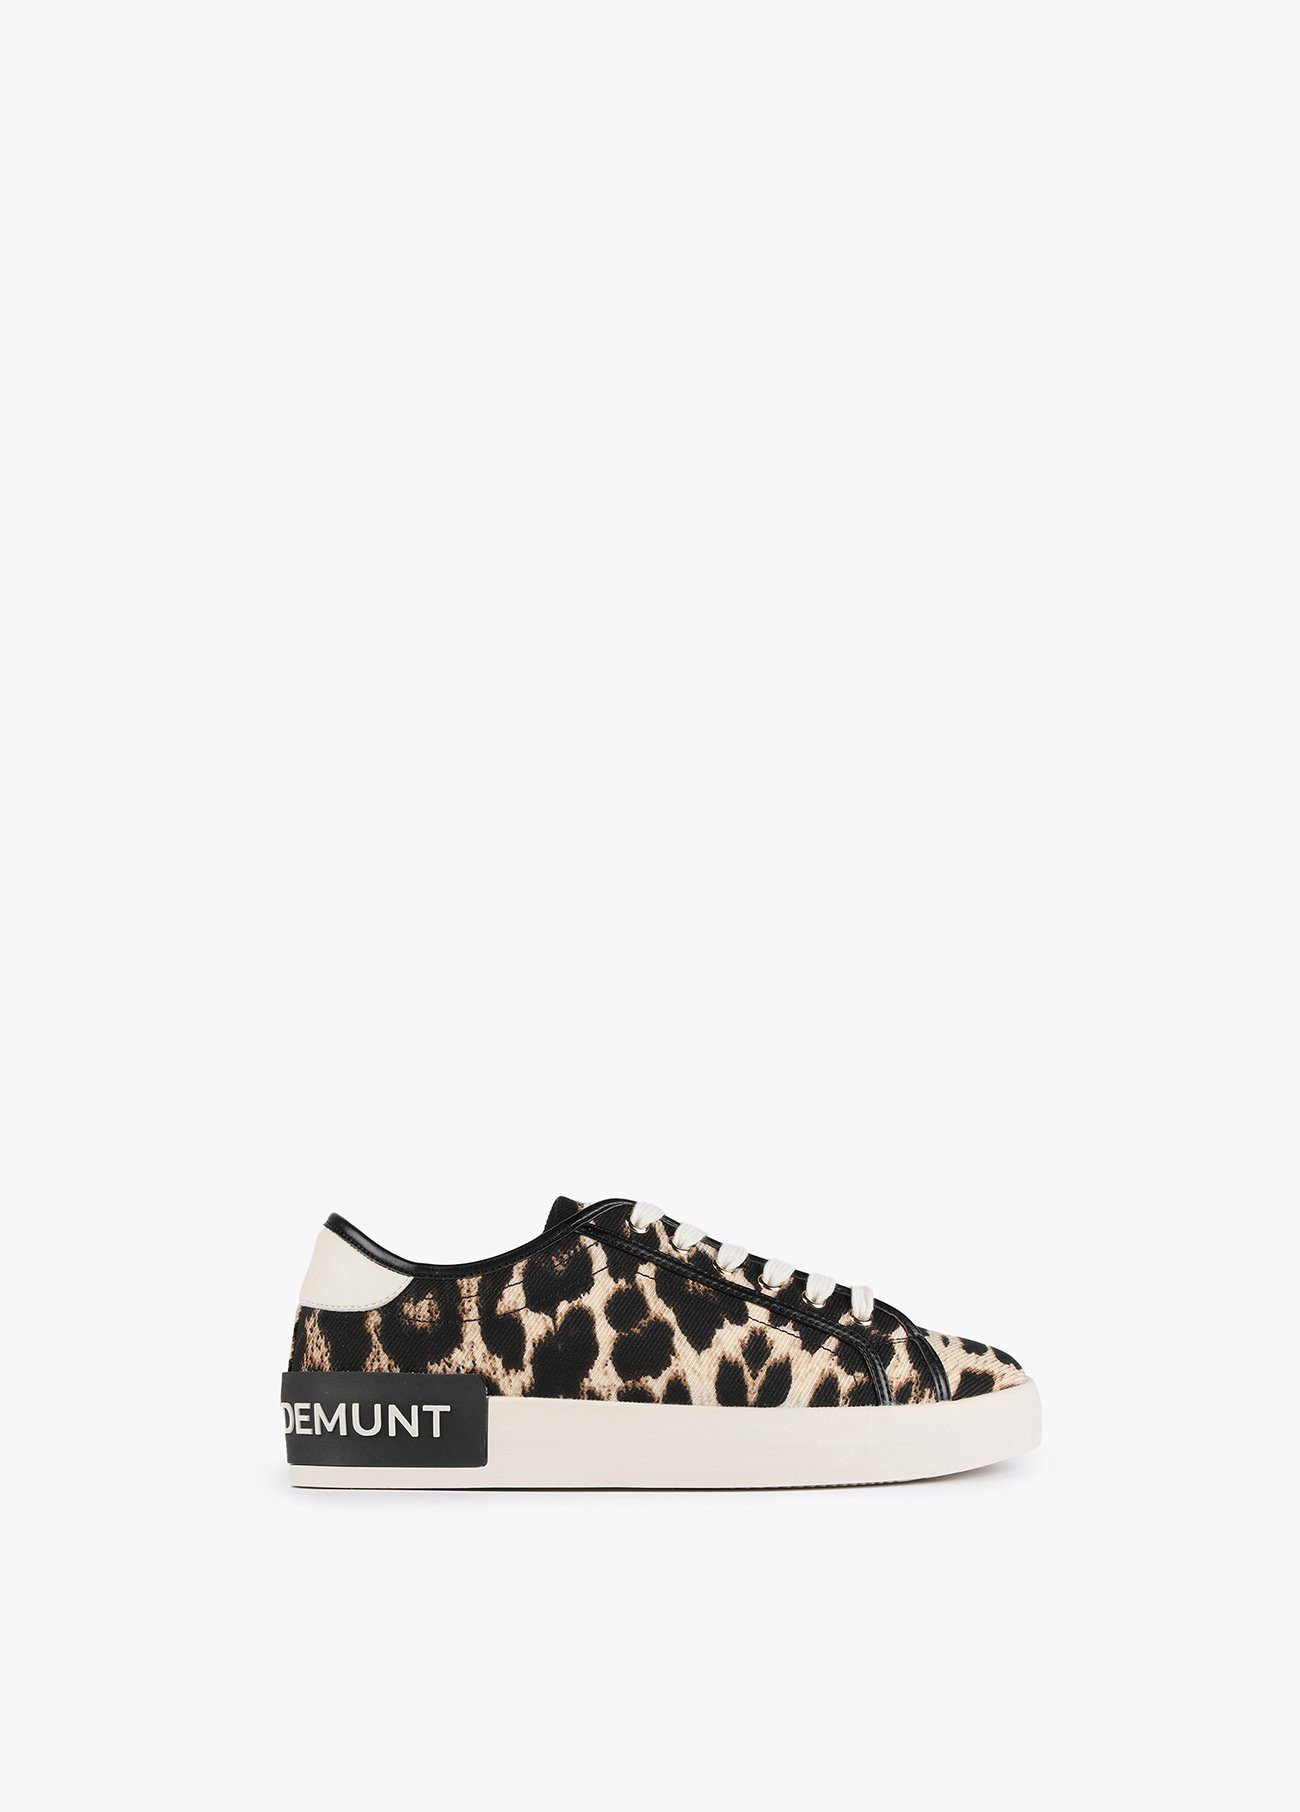 Converse CHUCK TAYLOR ALL STAR Cotton Animal Printed High-Top Sneakers  women - Glamood Outlet